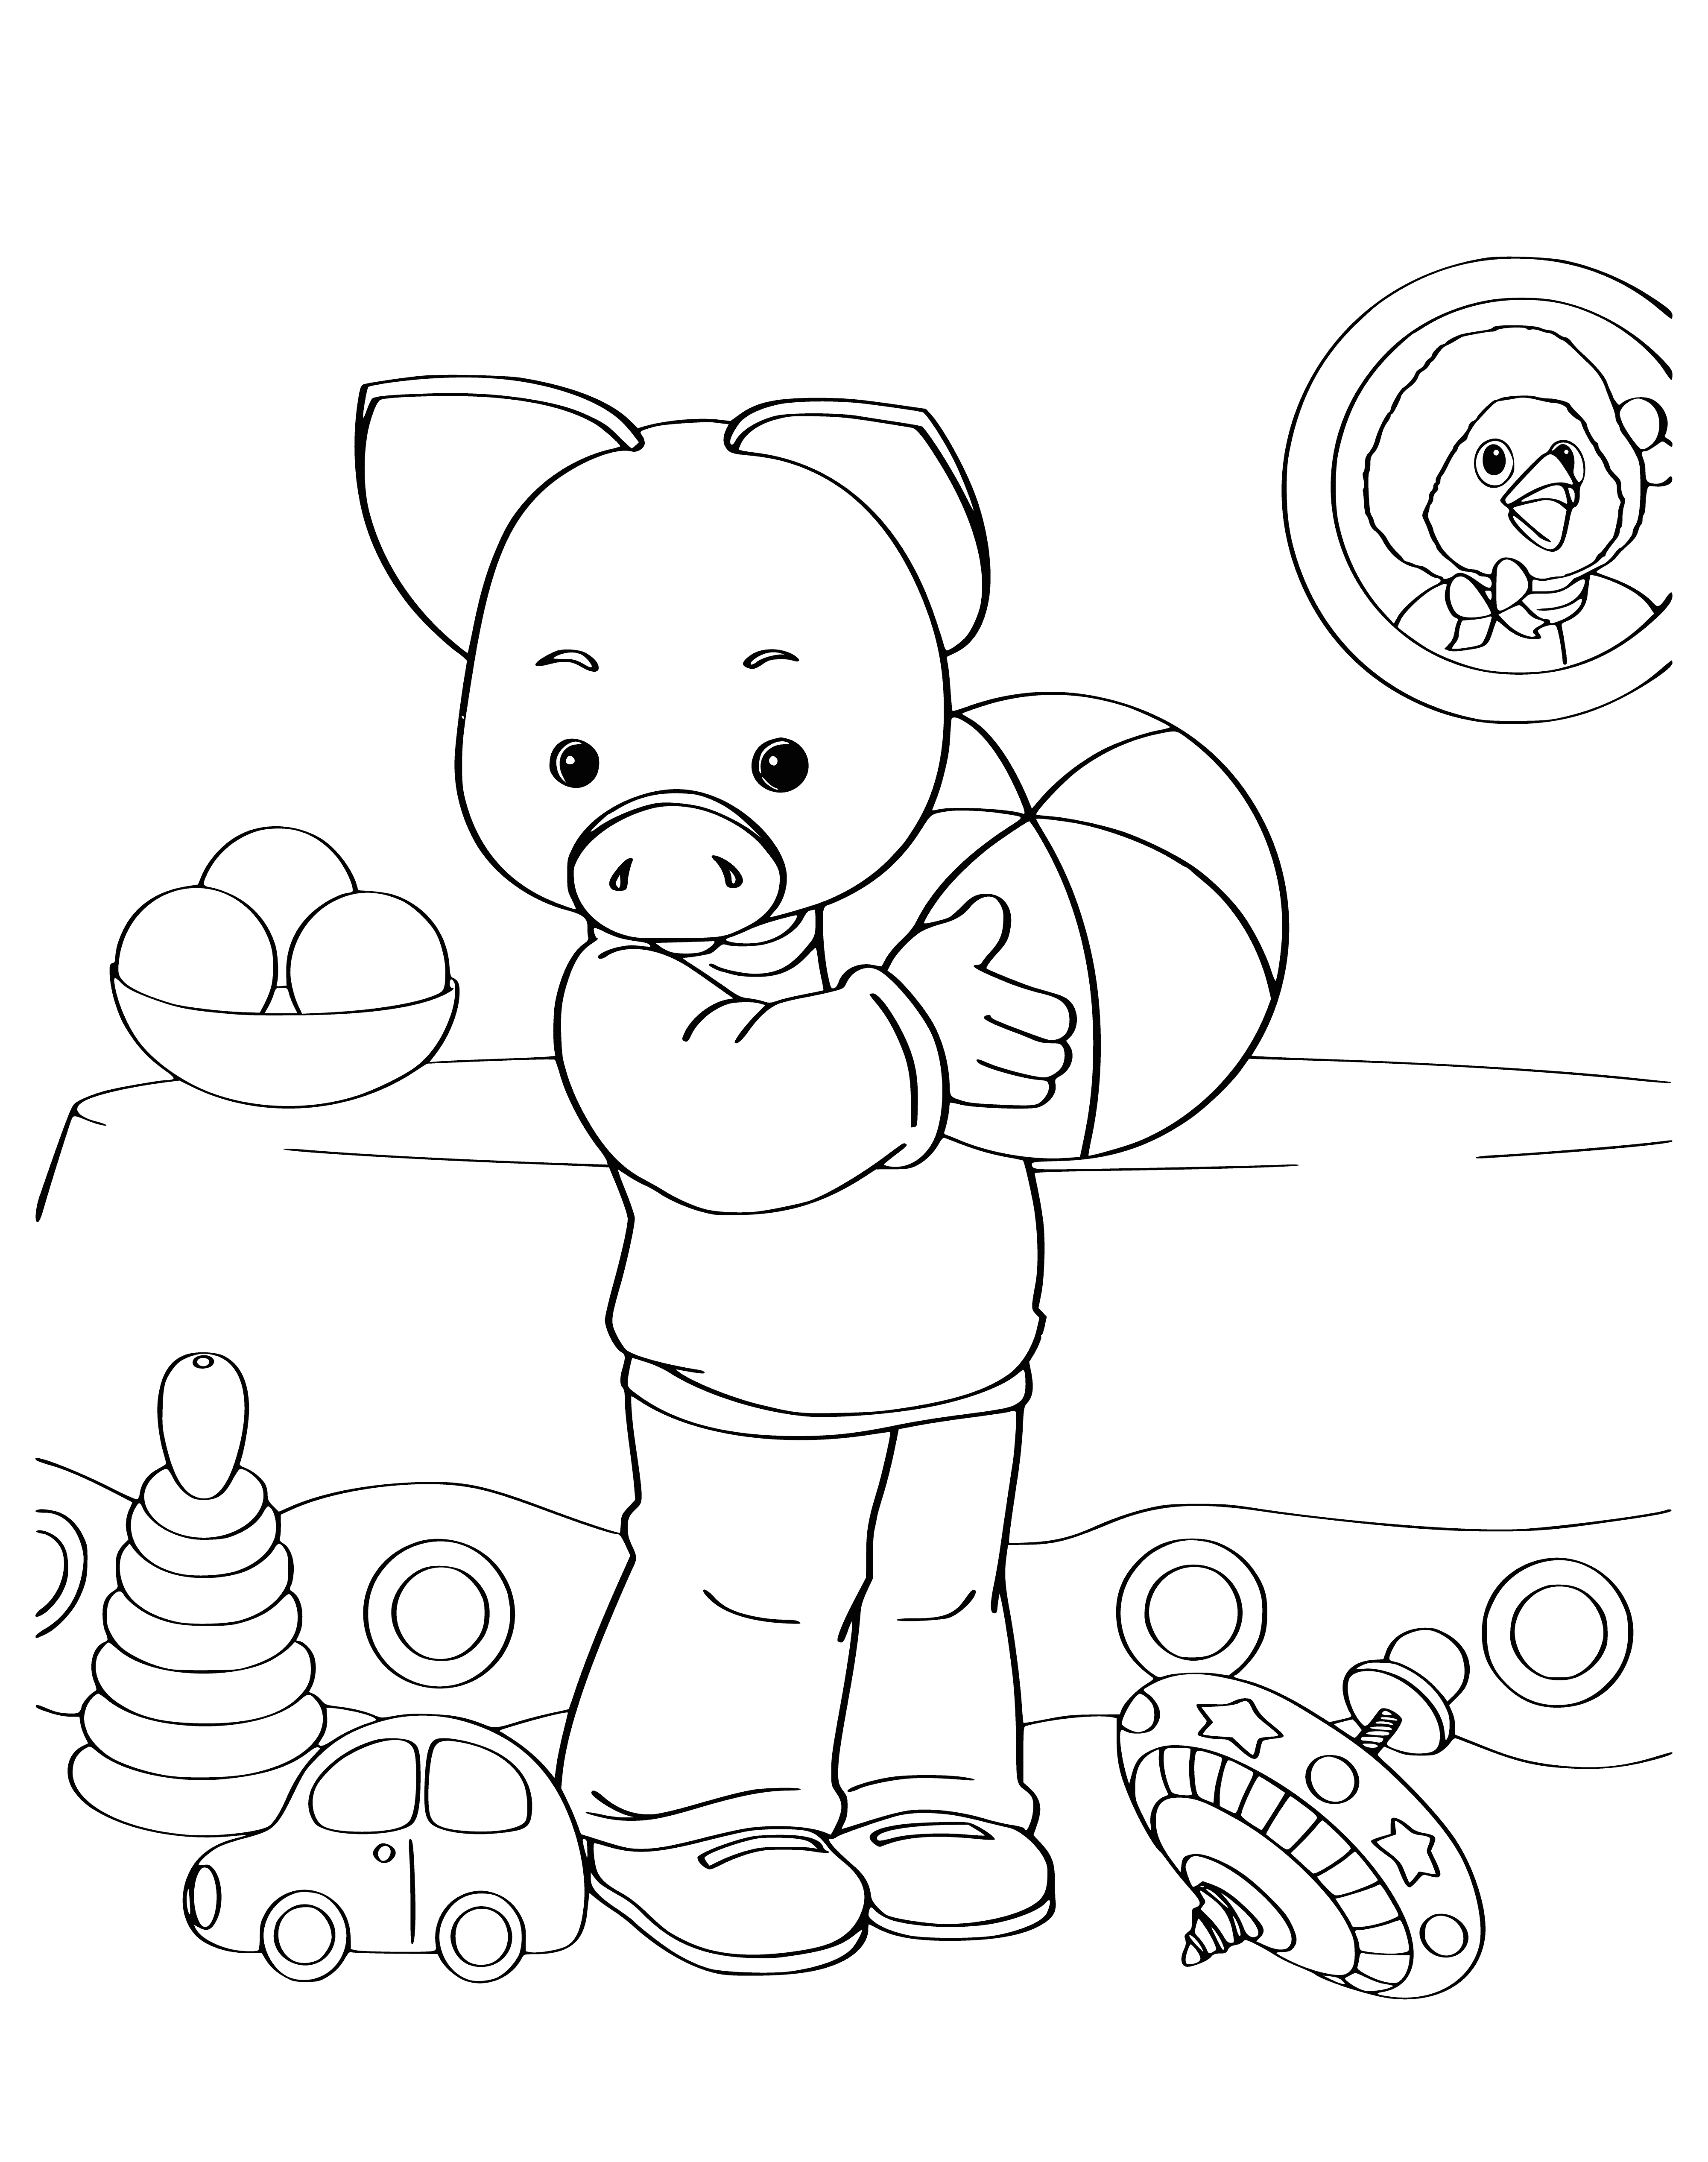 coloring page: Scene of Piggy saying goodnight to children in beds; a cute reminder of safety & love.